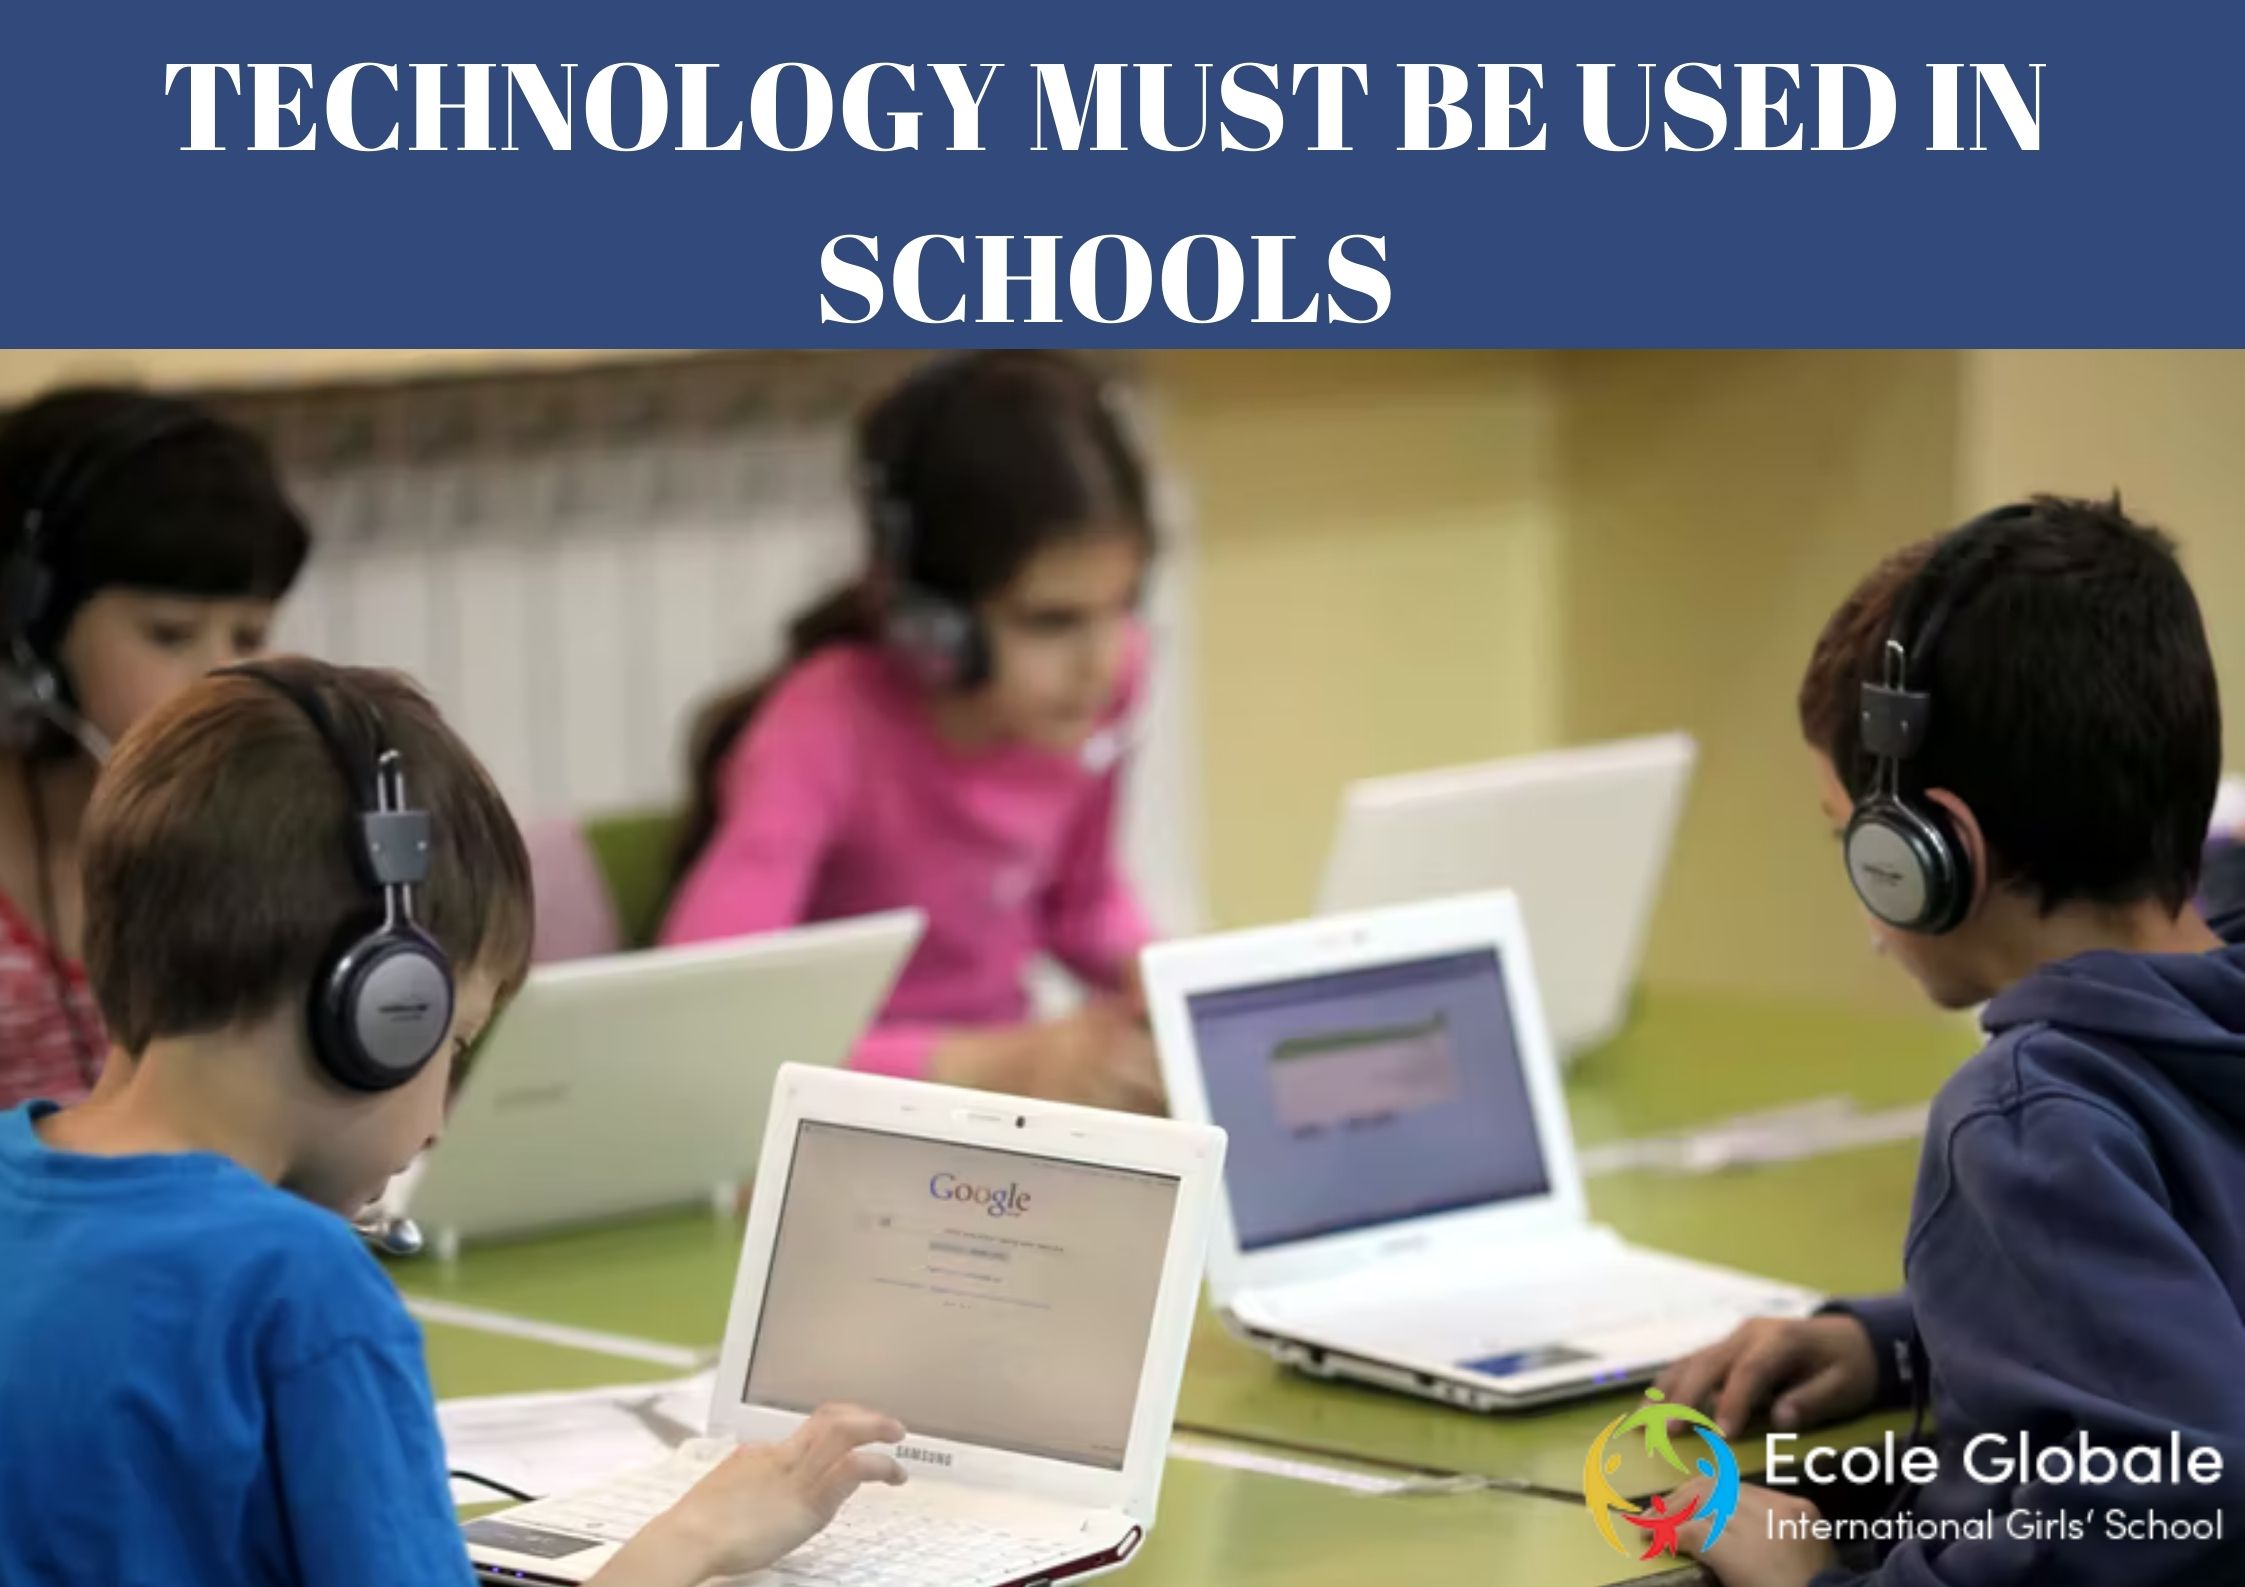 TECHNOLOGY MUST BE USED IN SCHOOLS